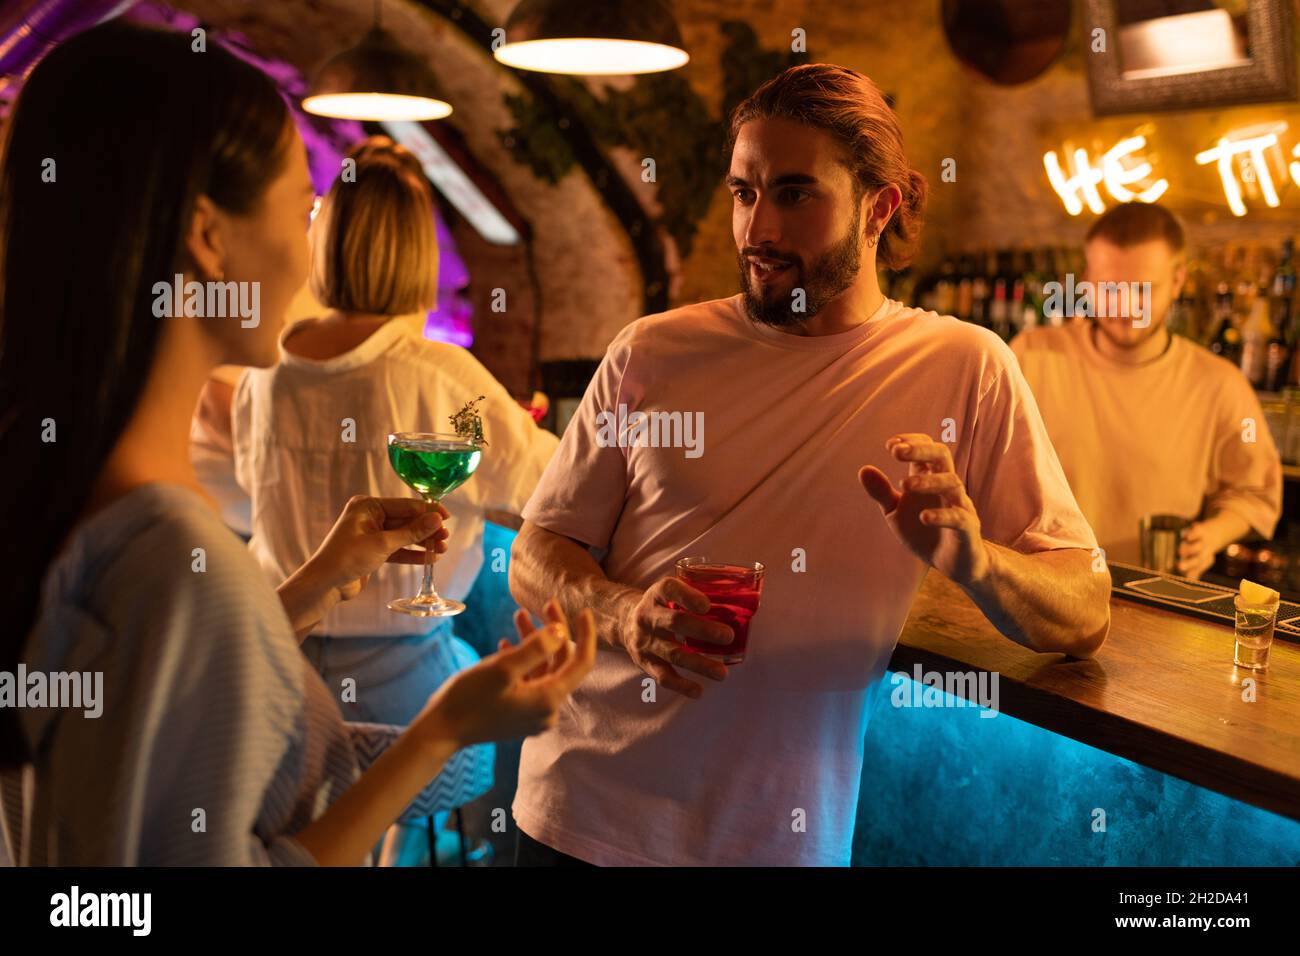 Bearded man with alcohol drink telling story to girlfriend near bar counter at night Stock Photo